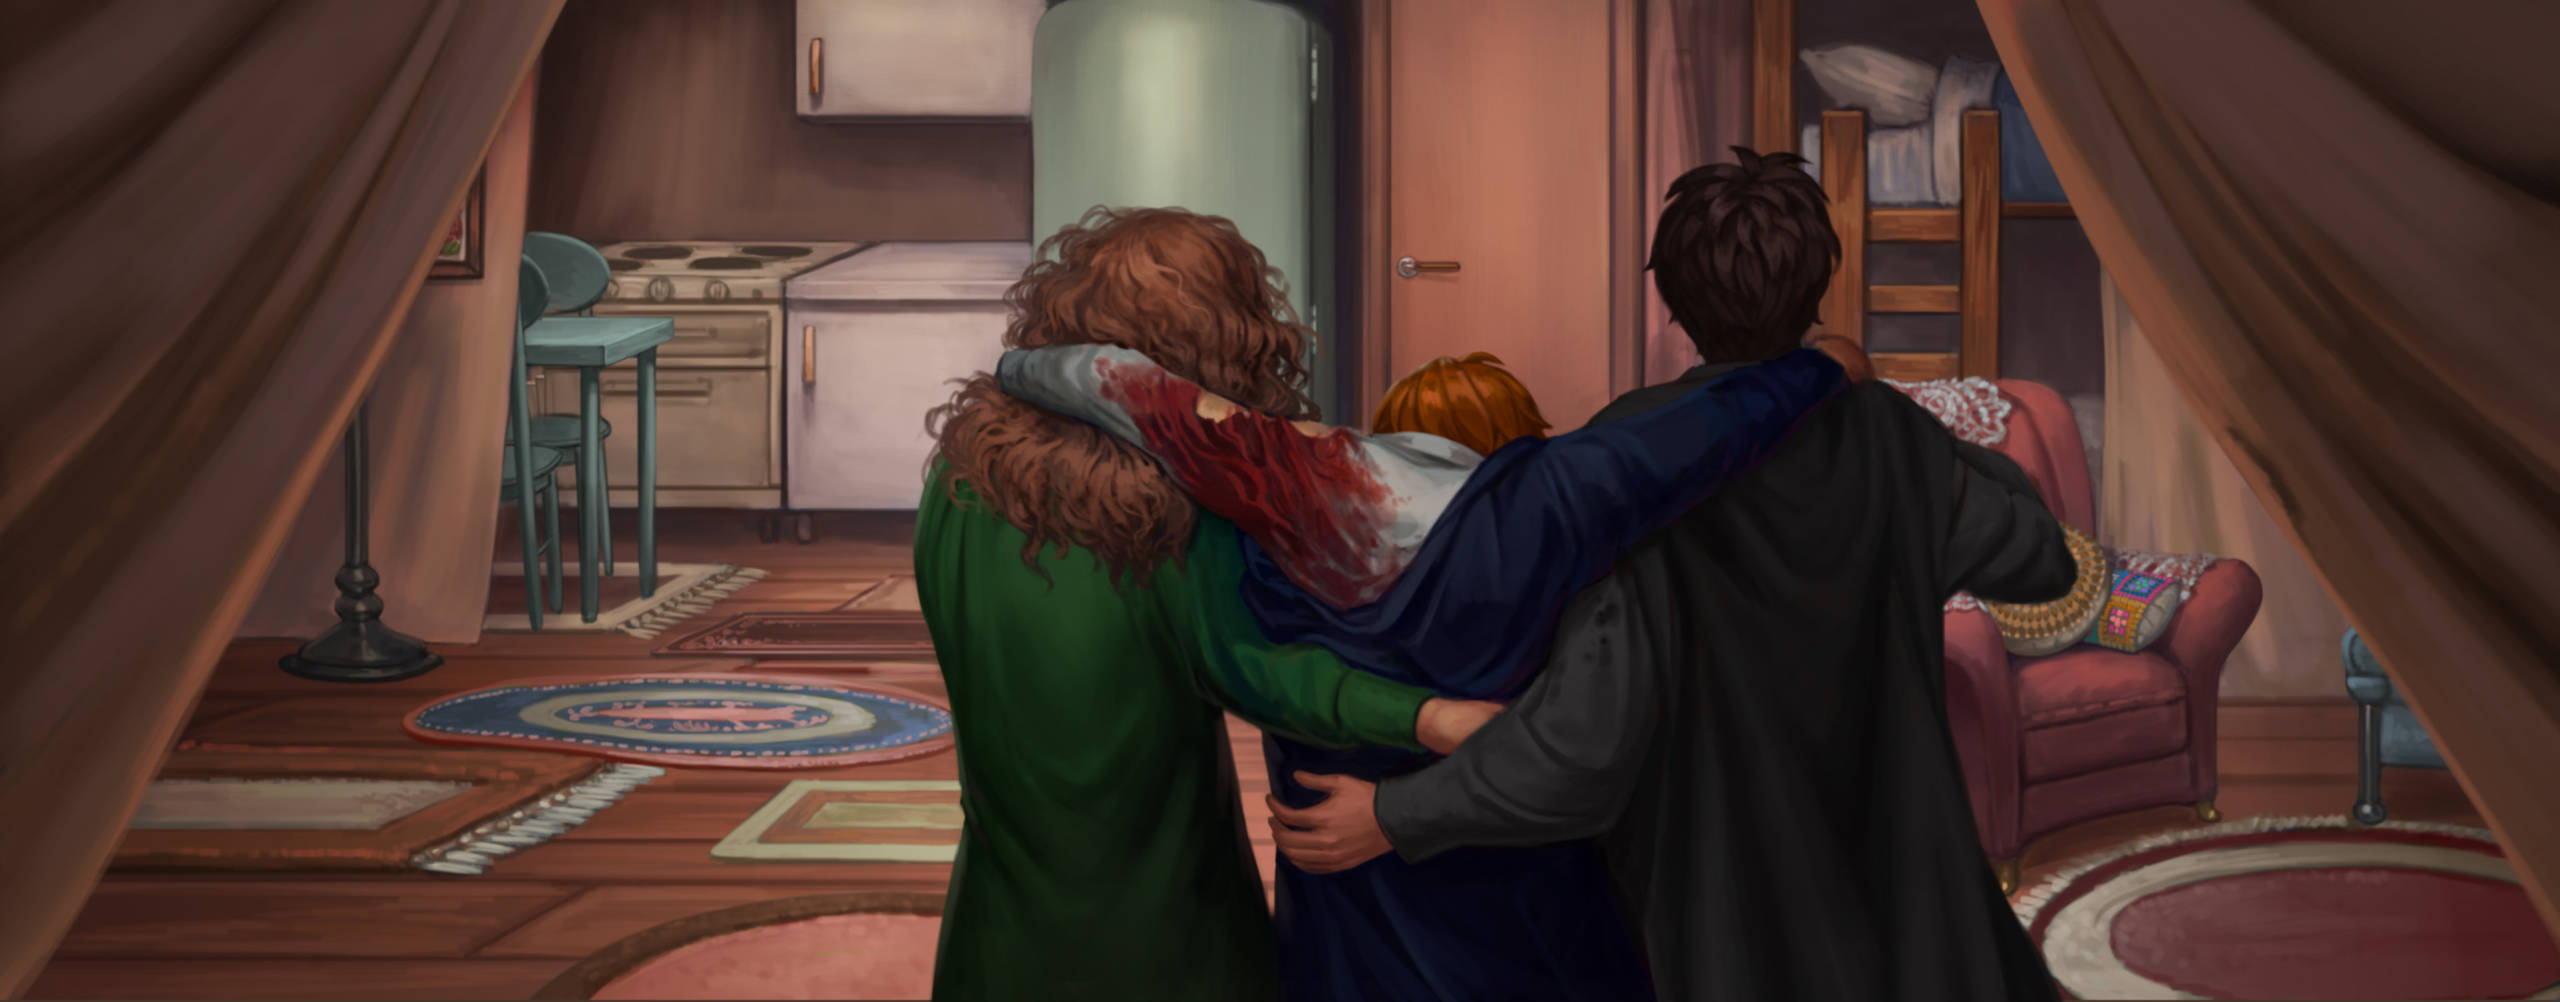 Harry and Hermione helping Ron after he has splinched himself.